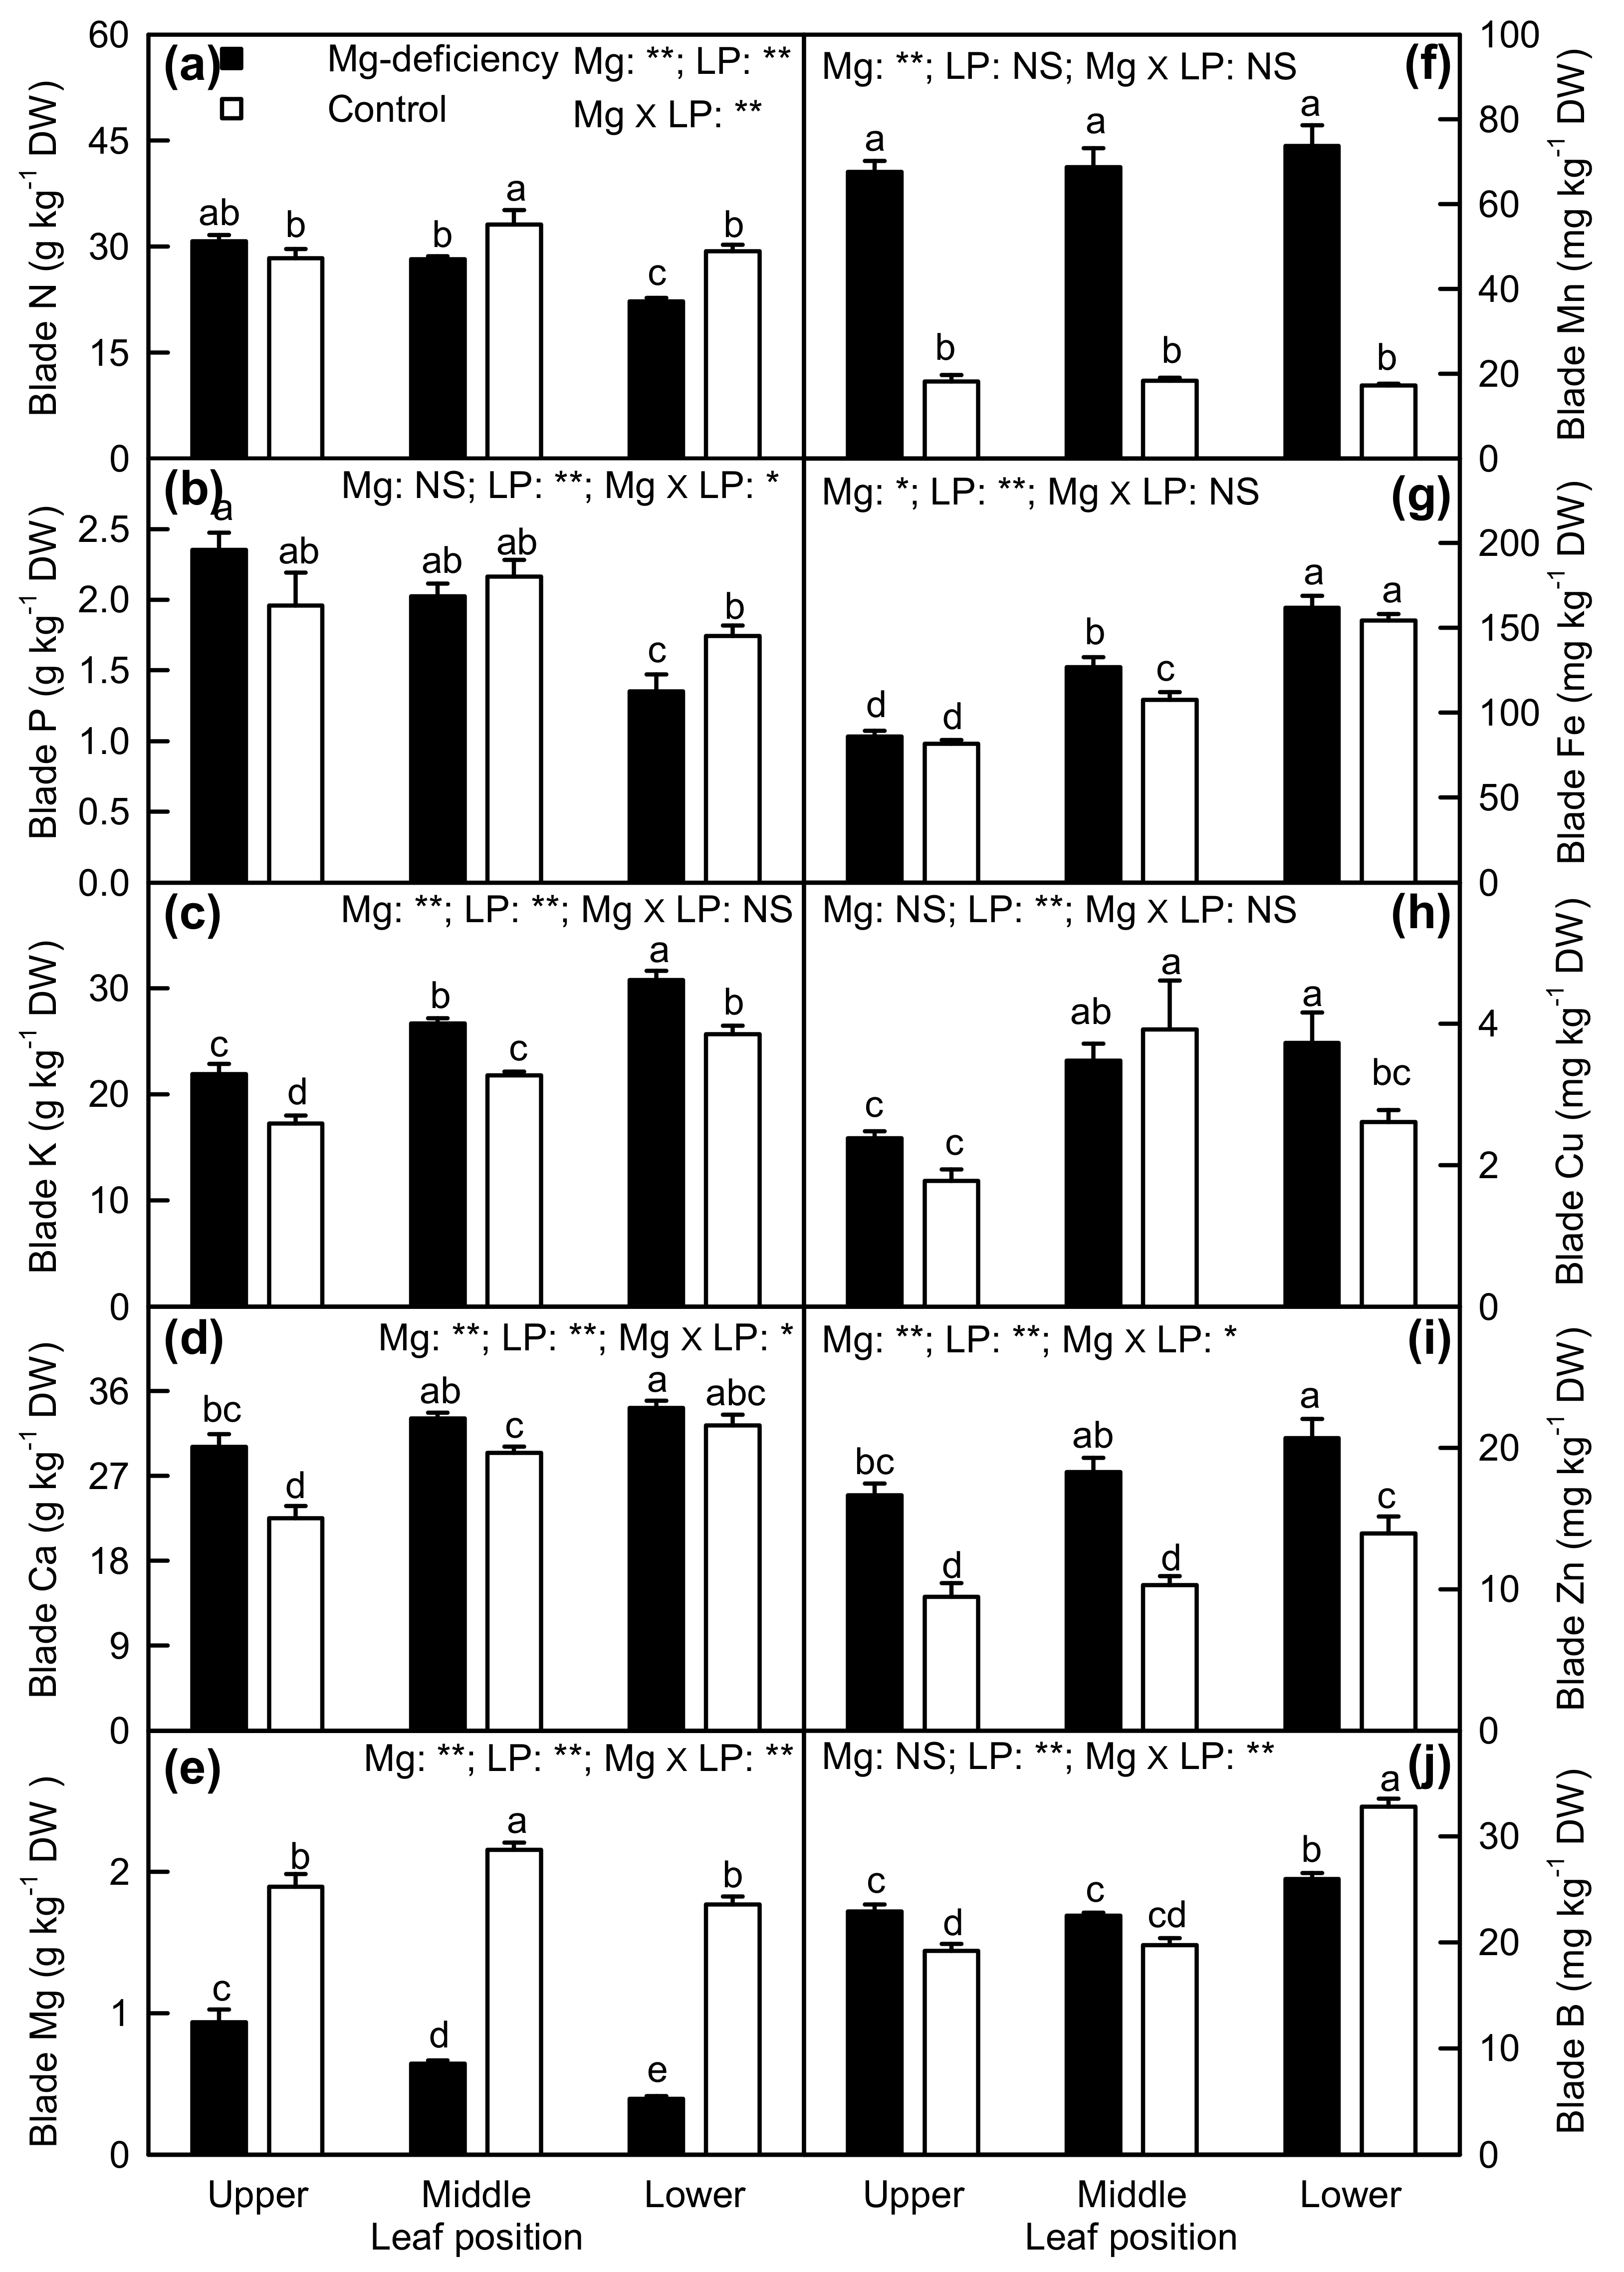 Plants Free Full Text Magnesium Deficiency Effects On Pigments Photosynthesis And Photosynthetic Electron Transport Of Leaves And Nutrients Of Leaf Blades And Veins In Citrus Sinensis Seedlings Html